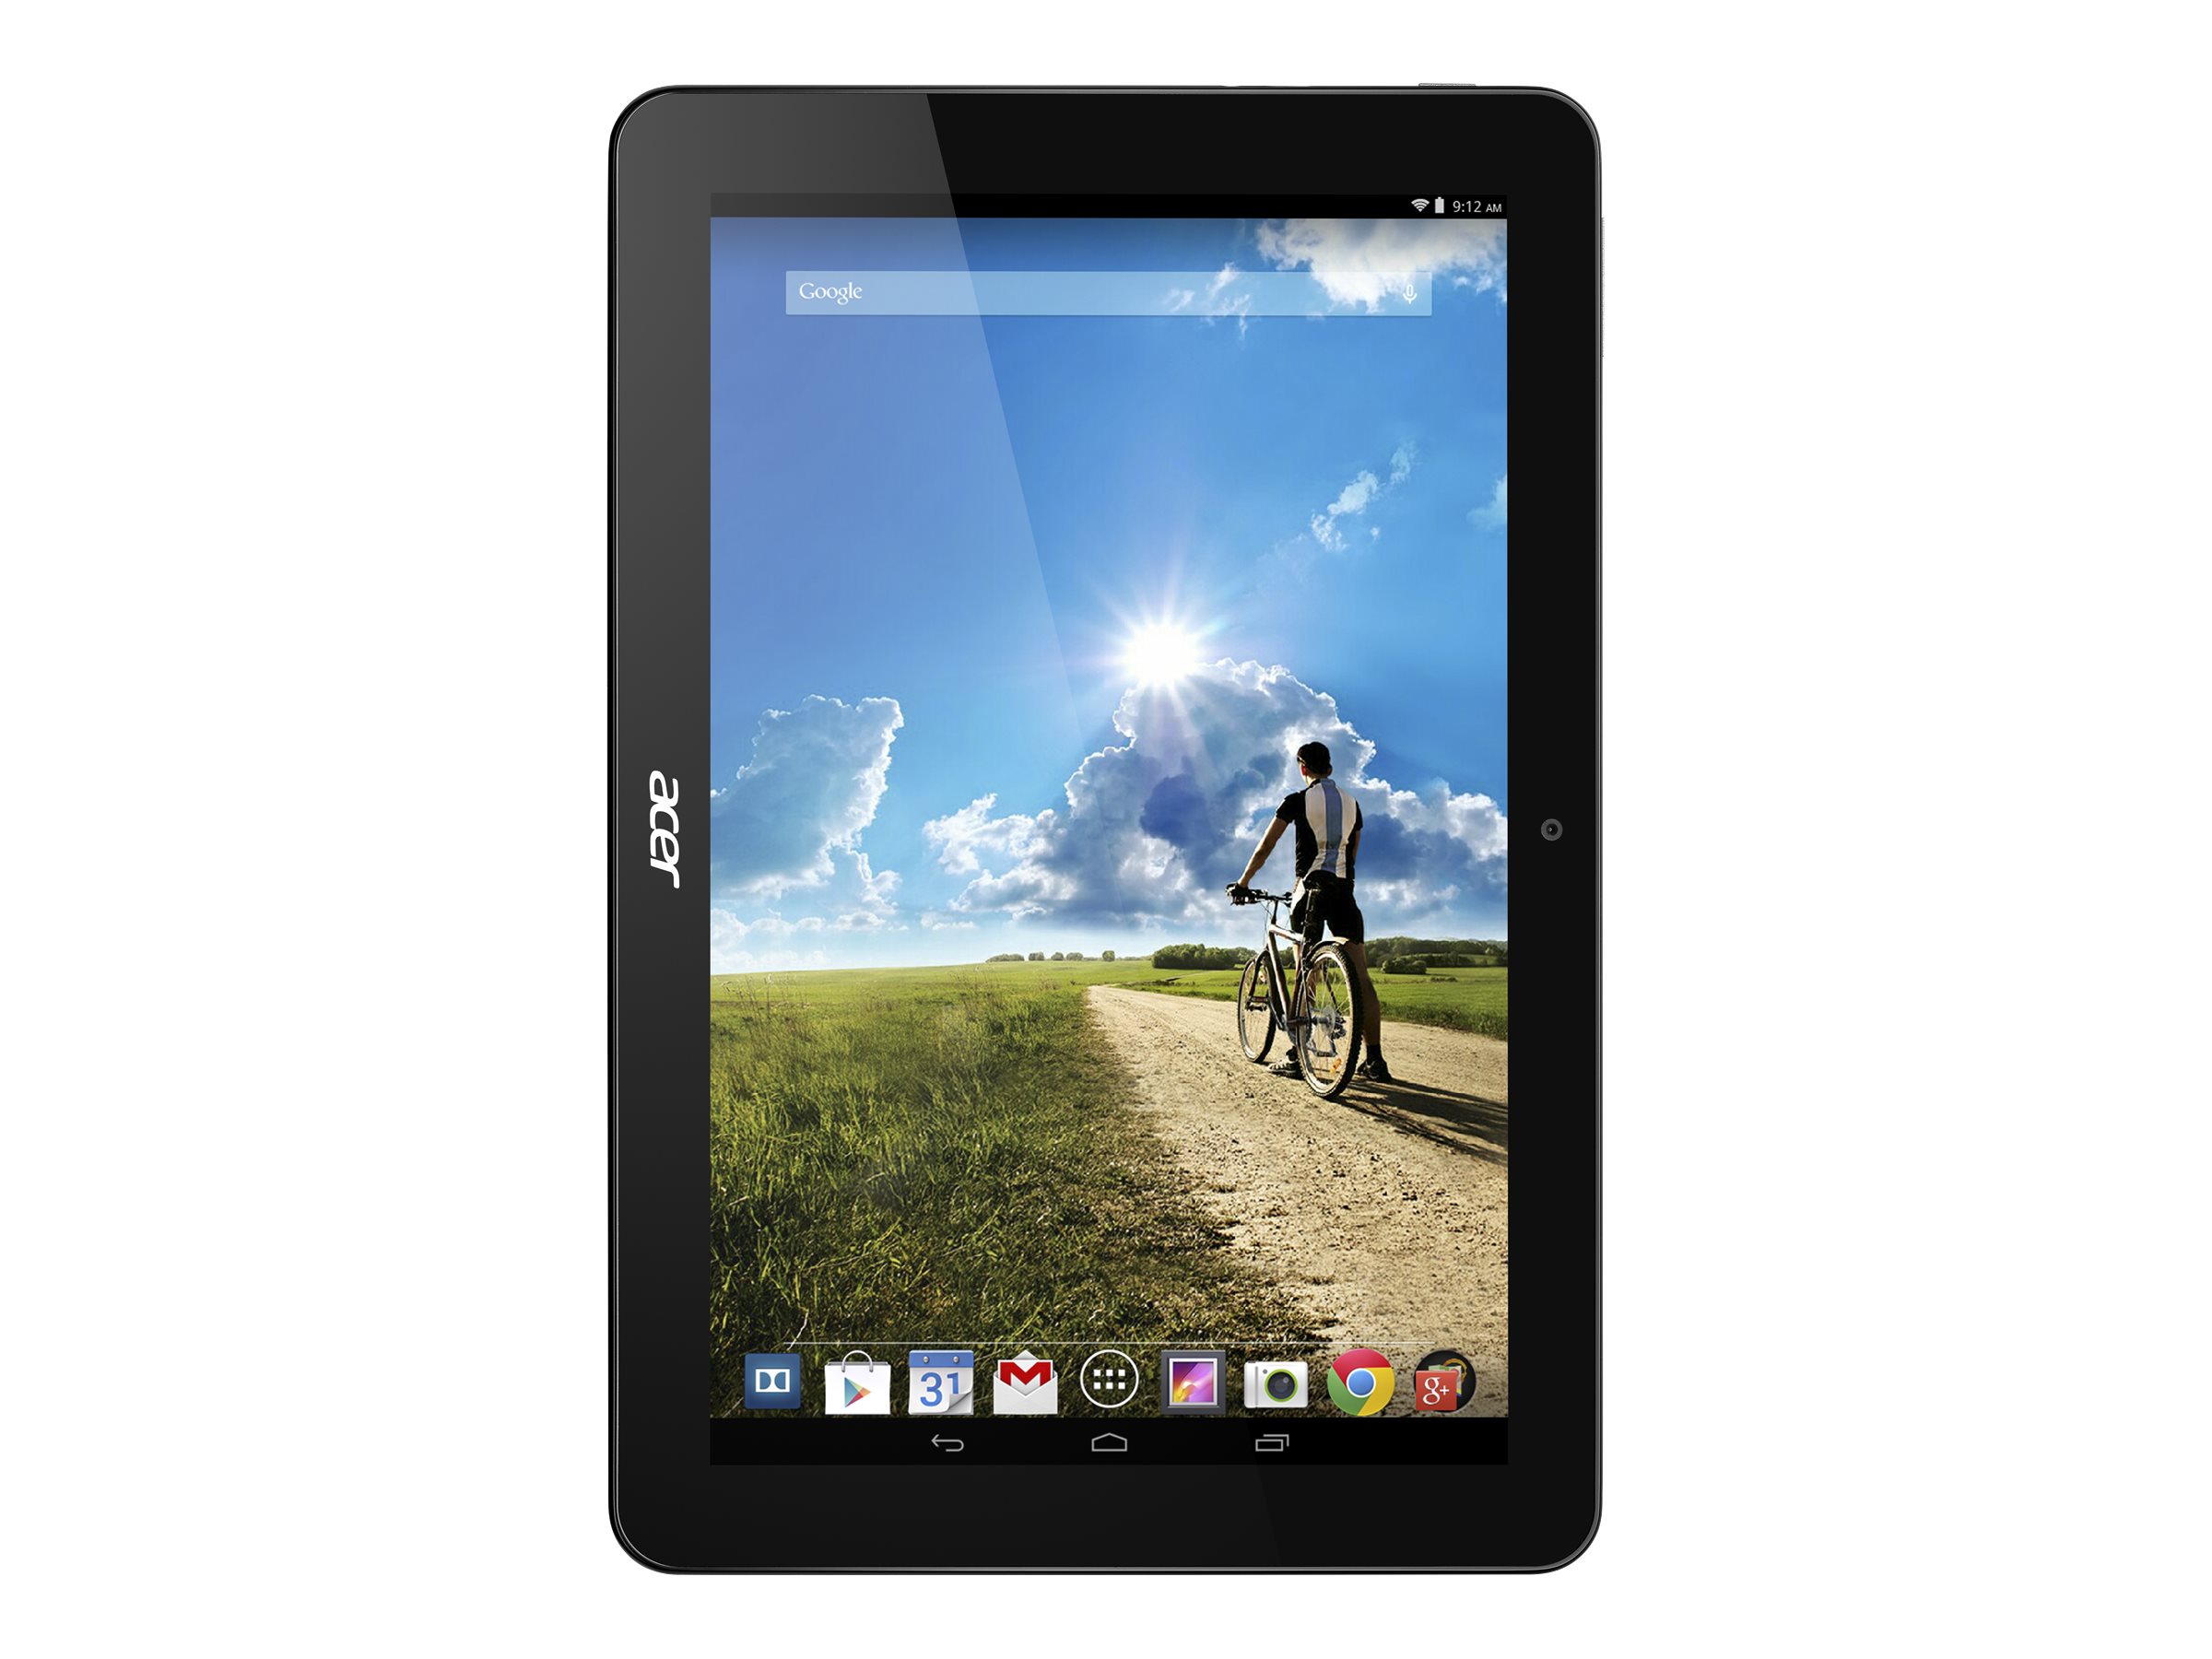 Acer ICONIA A3-A20 A3-A20-K19H Tablet, 10.1" WXGA, Cortex A7 Quad-core (4 Core) 1.30 GHz, 1 GB RAM, 16 GB Storage, Android 4.4 KitKat - image 1 of 13